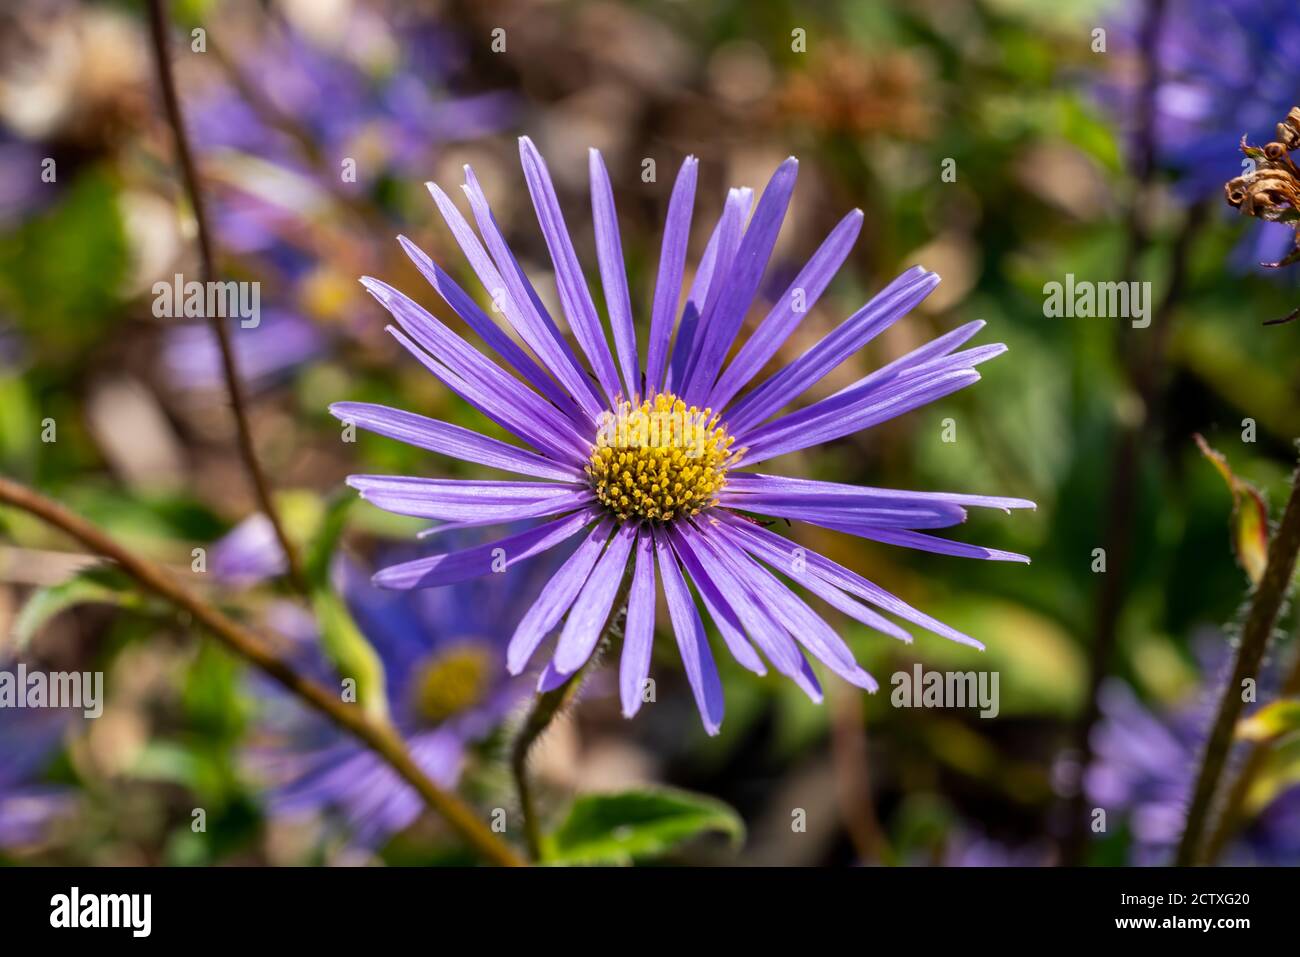 Aster peduncularis a purple blue herbaceous summer autumn perennial flower plant commonly known as Michaelmas daisy stock photo image Stock Photo